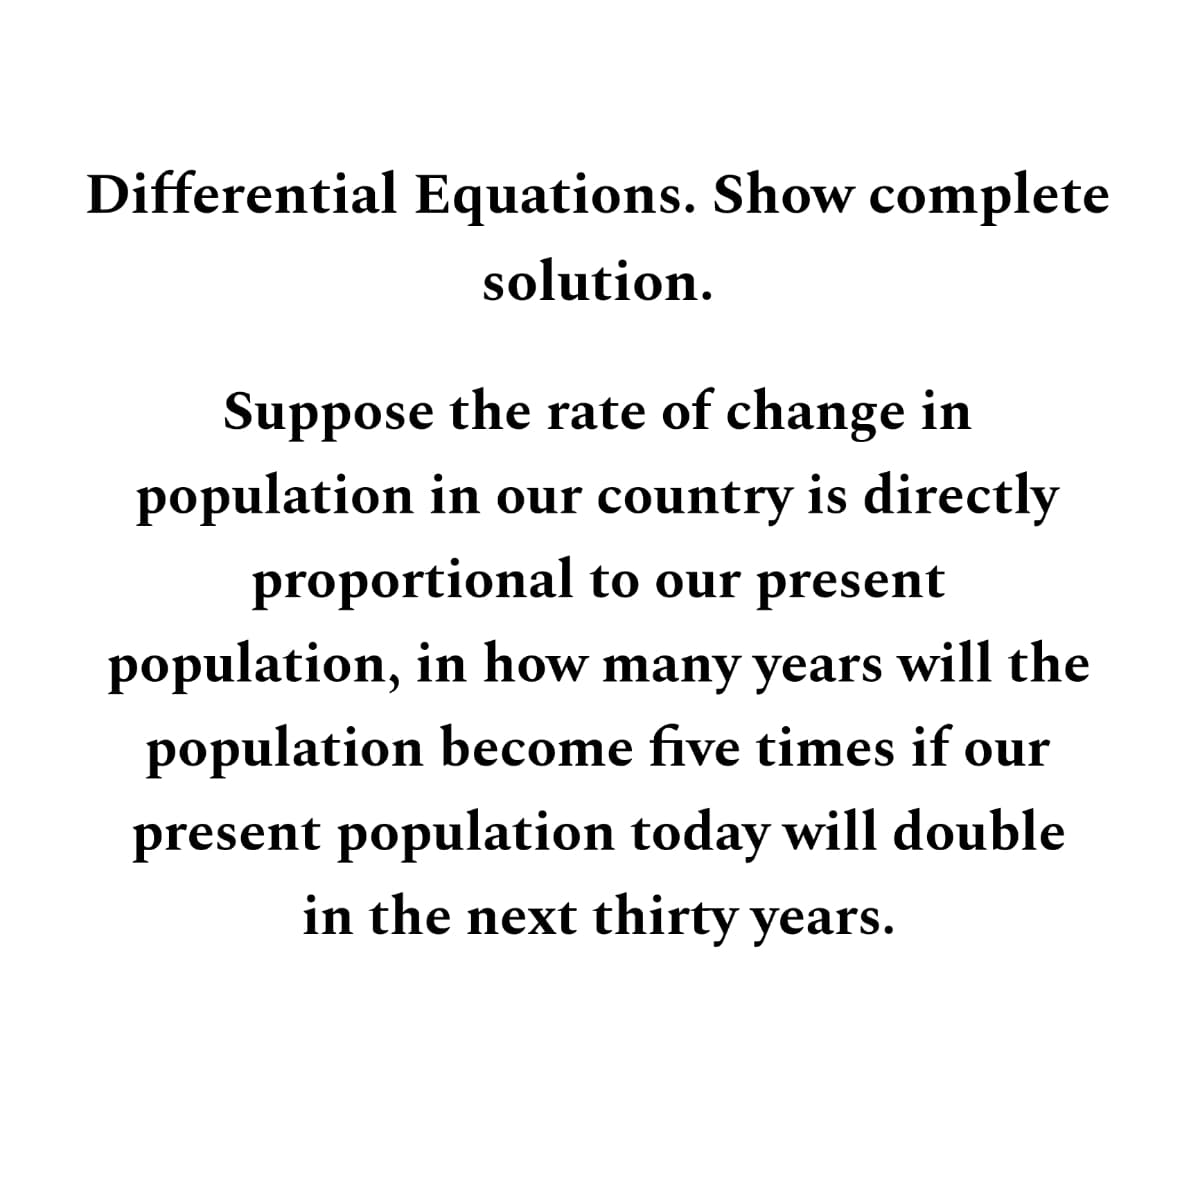 Differential Equations. Show complete
solution.
Suppose the rate of change in
population in our country is directly
proportional to our present
population, in how many years will the
population become five times if our
present population today will double
in the next thirty years.